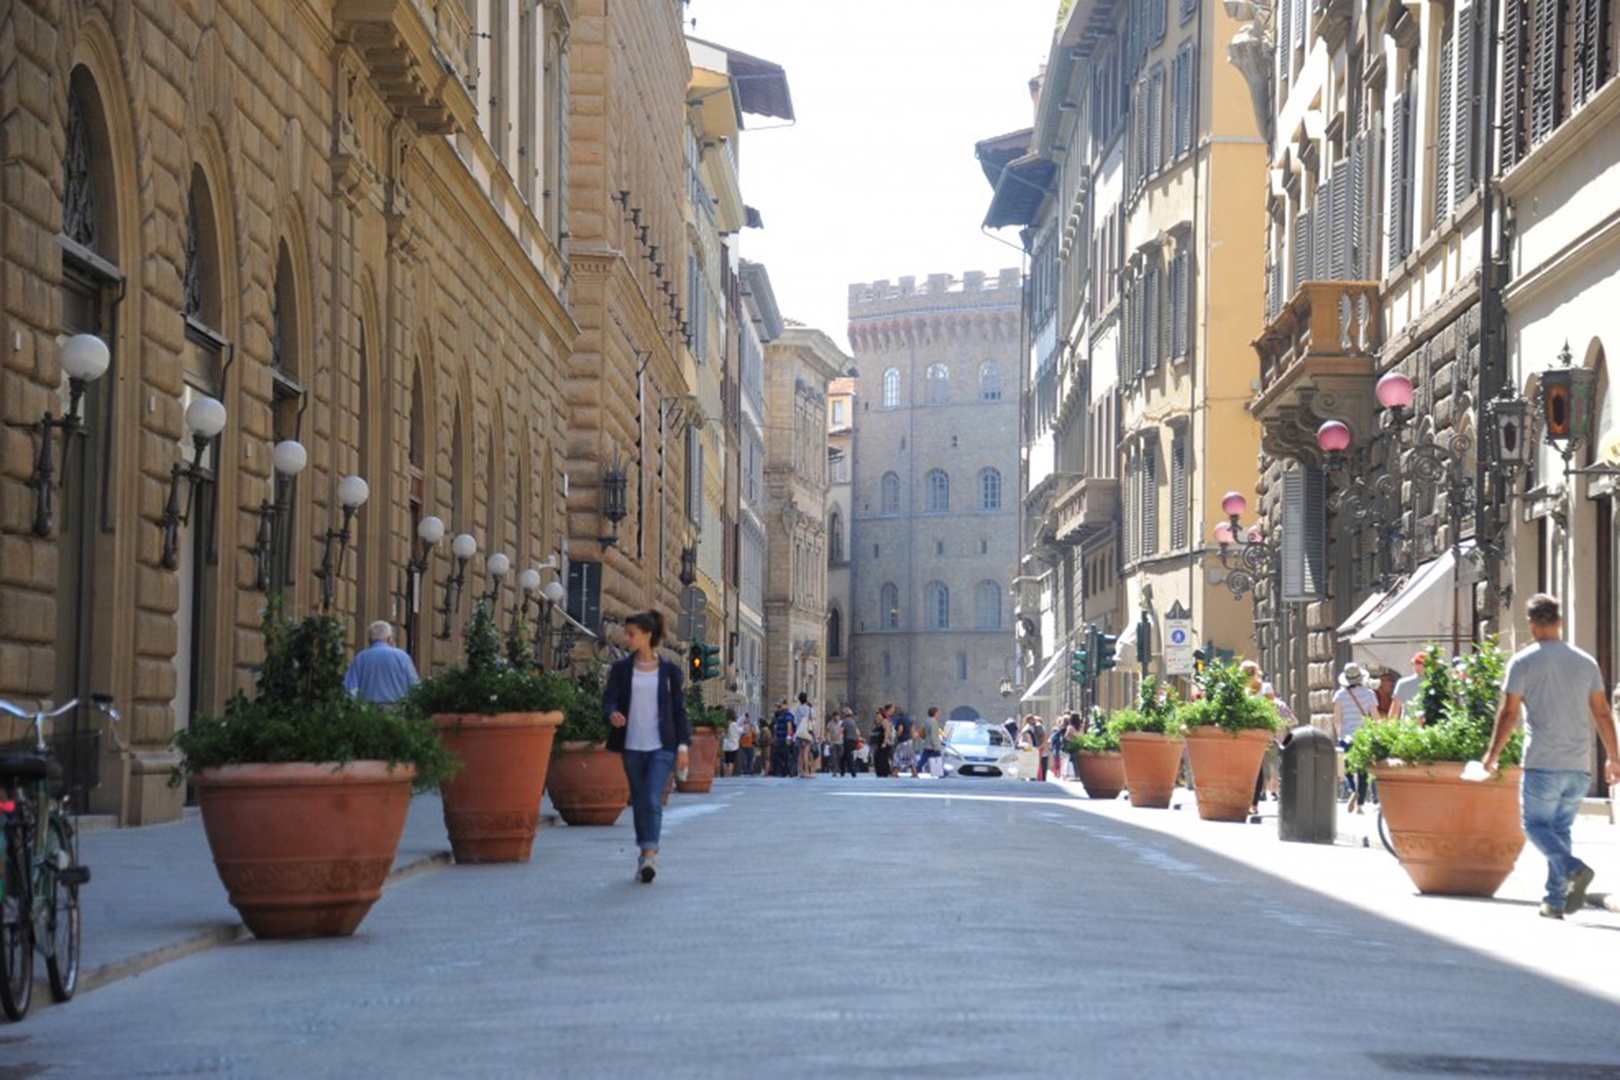 Via Tornabuoni is one of Florence's best shopping streets with some interesting food, too. Pedestrian street.